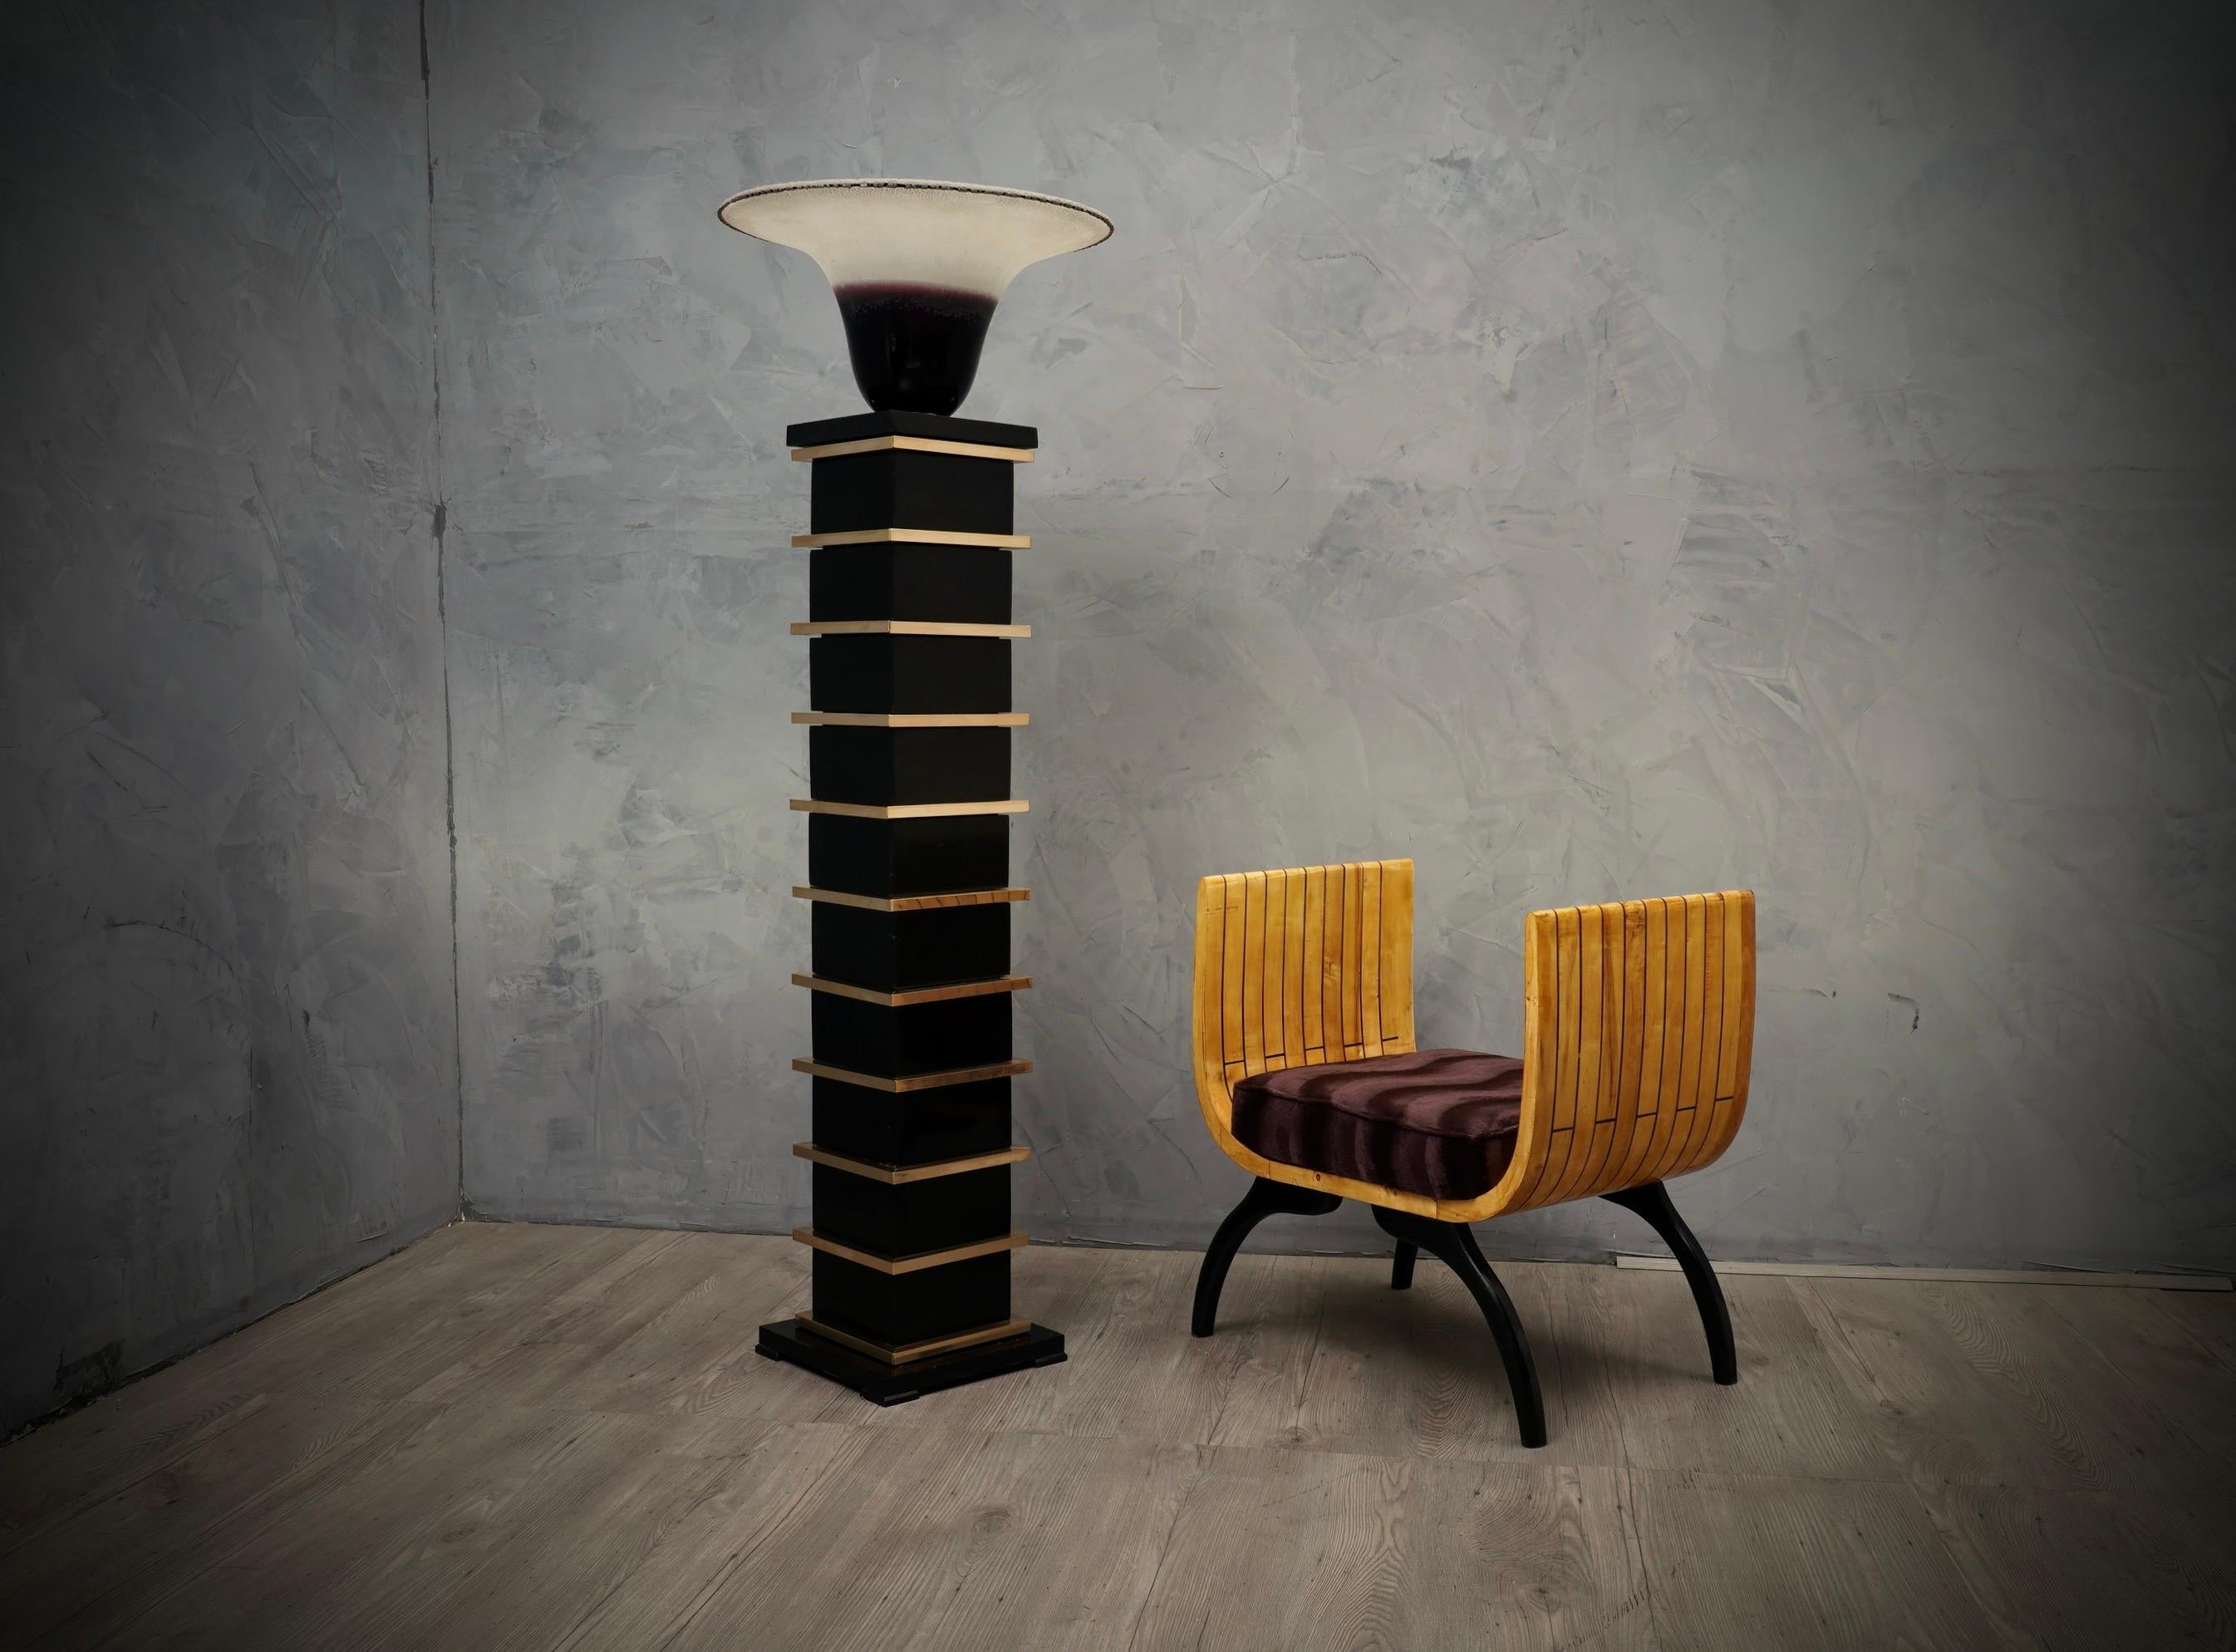 Lovely and fine floor lamp with glass mounting signed by Barbini Murano, with a very particular appearance due to the large cup placed on a black wooden and brass base. The Murano furnaces create a glass with an indisputable timeless design.

The